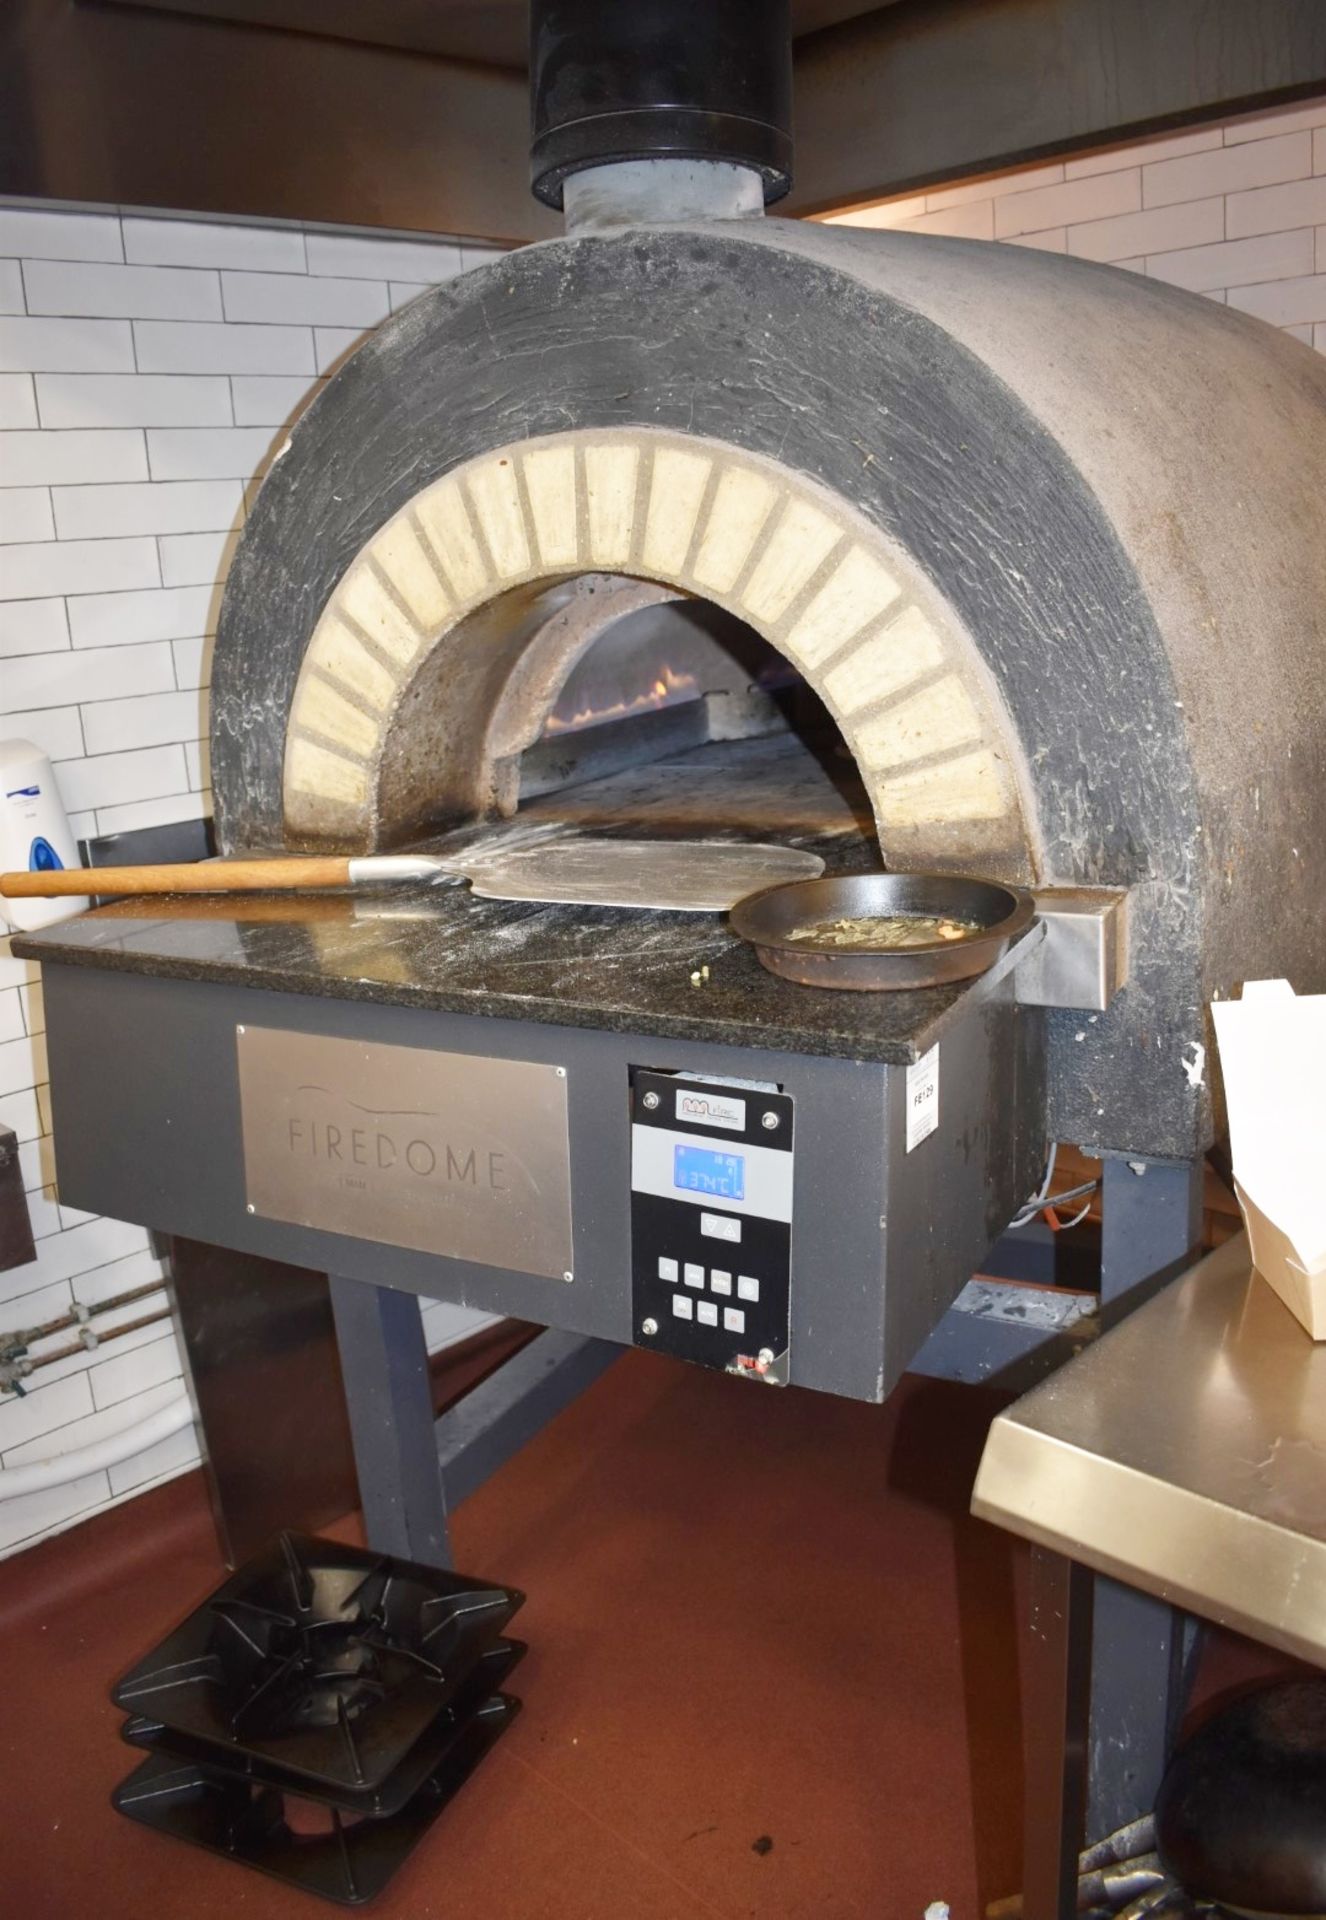 1 x MAM Firedome Commercial Stone Baked Gas Pizza Oven - Made in Italy - Type Modular Fire E - CL499 - Image 3 of 10